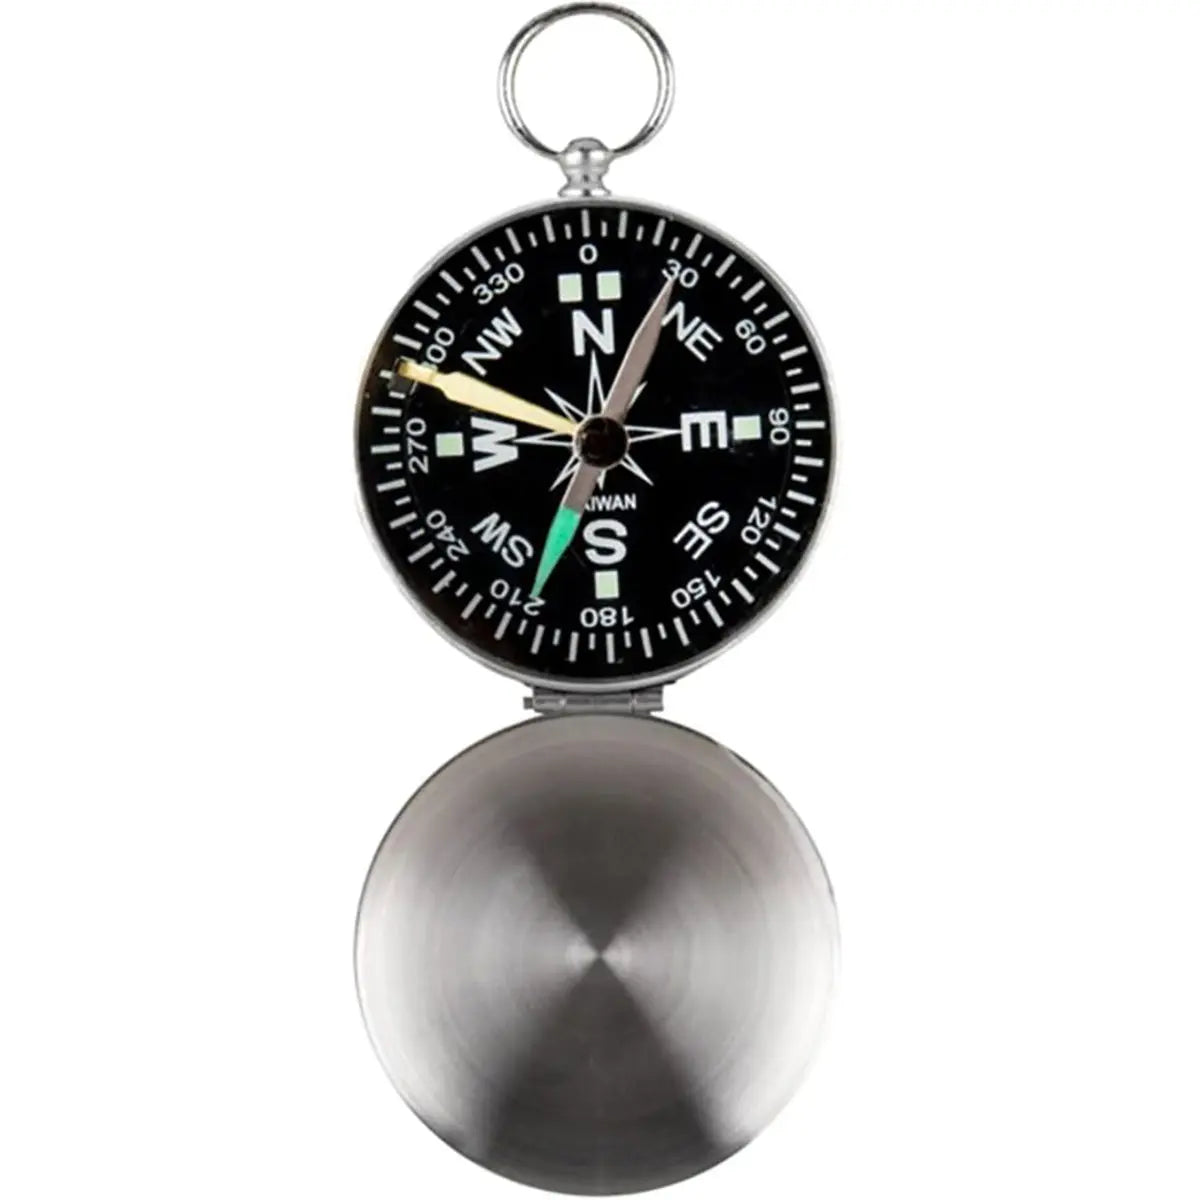 Coghlan's Magnetic Pocket Compass with Metal Case, Luminous Dial, Pocket Size Coghlan's